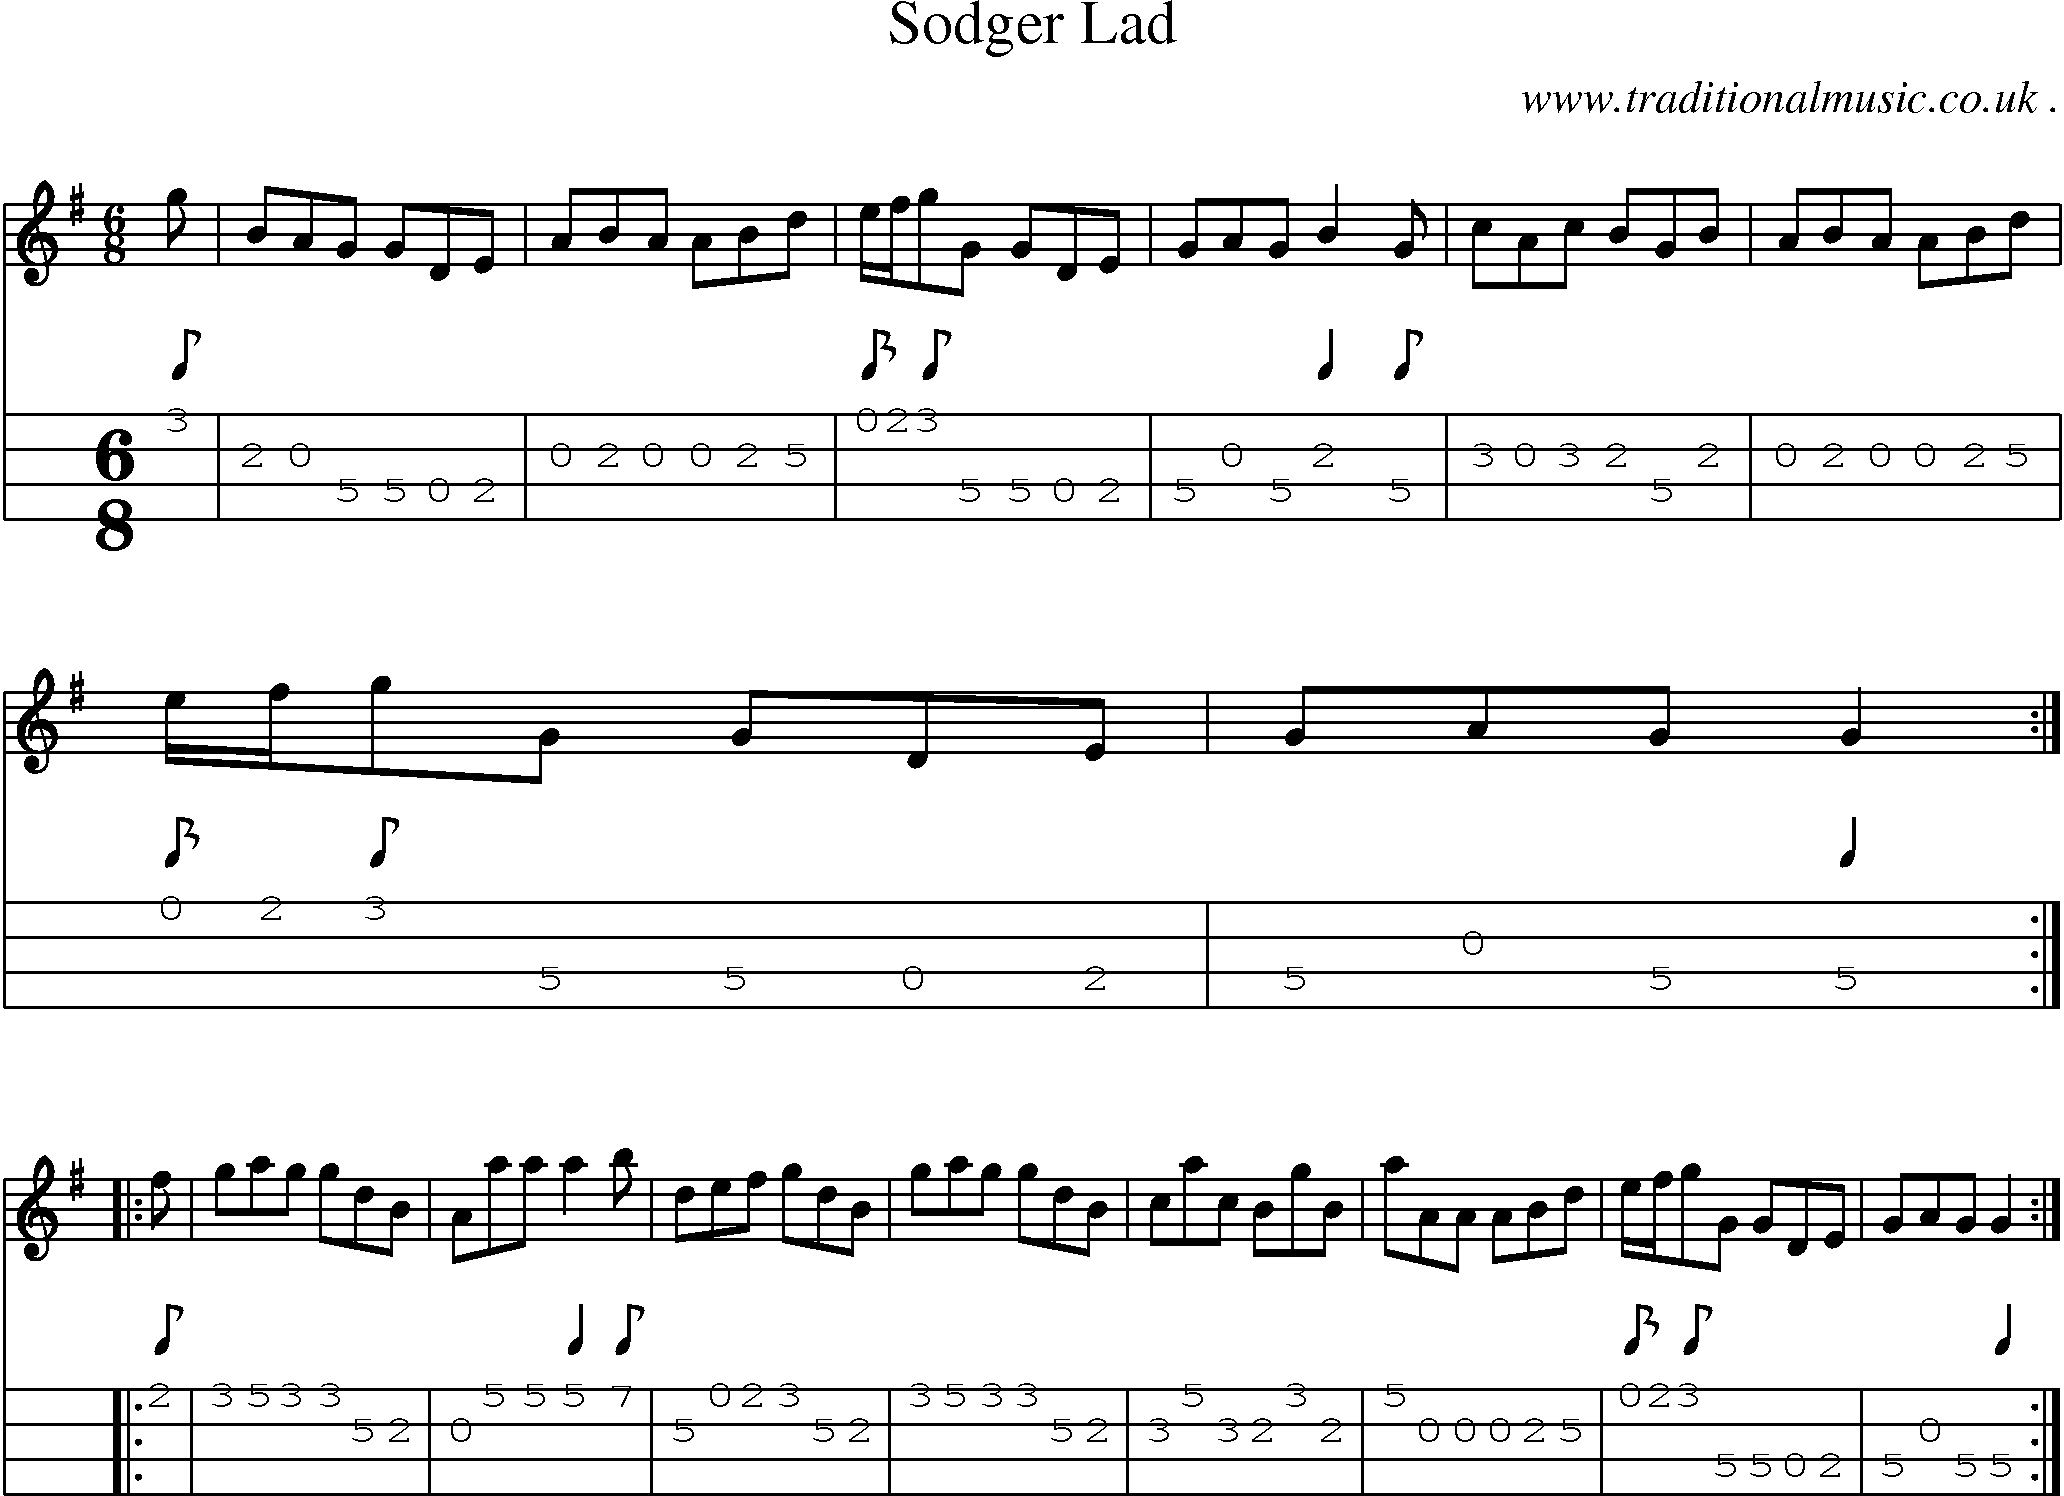 Sheet-music  score, Chords and Mandolin Tabs for Sodger Lad